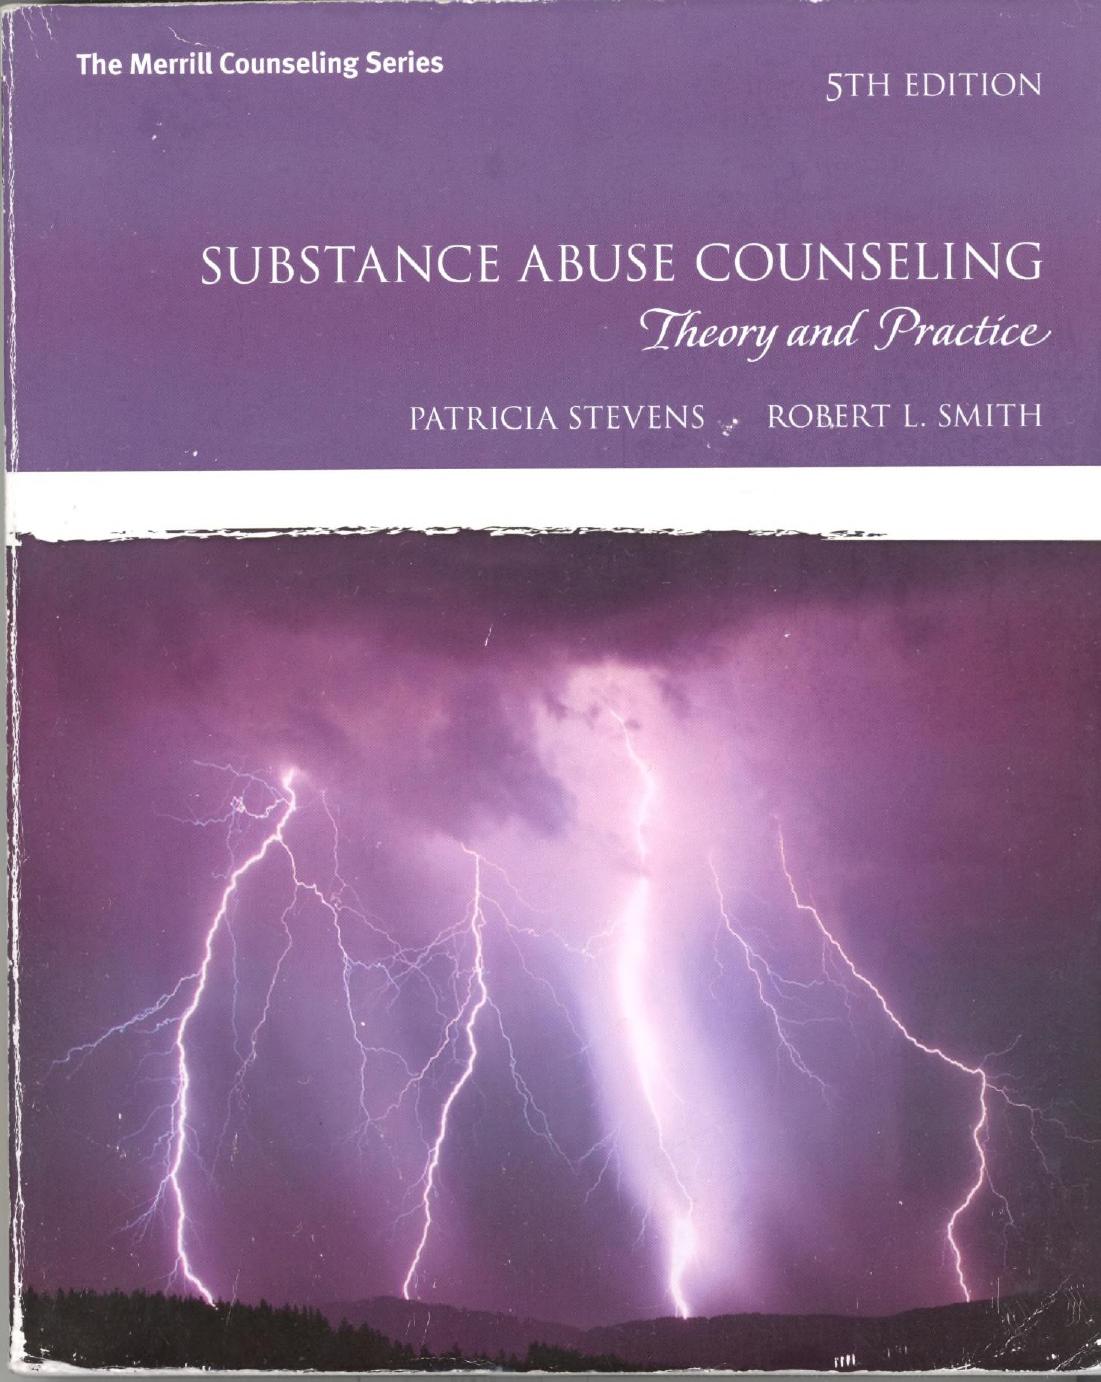 51 Substance Abuse Counseling  Theory and Practice (5th Edition) (Merrill Counseling ( PDFDrive )